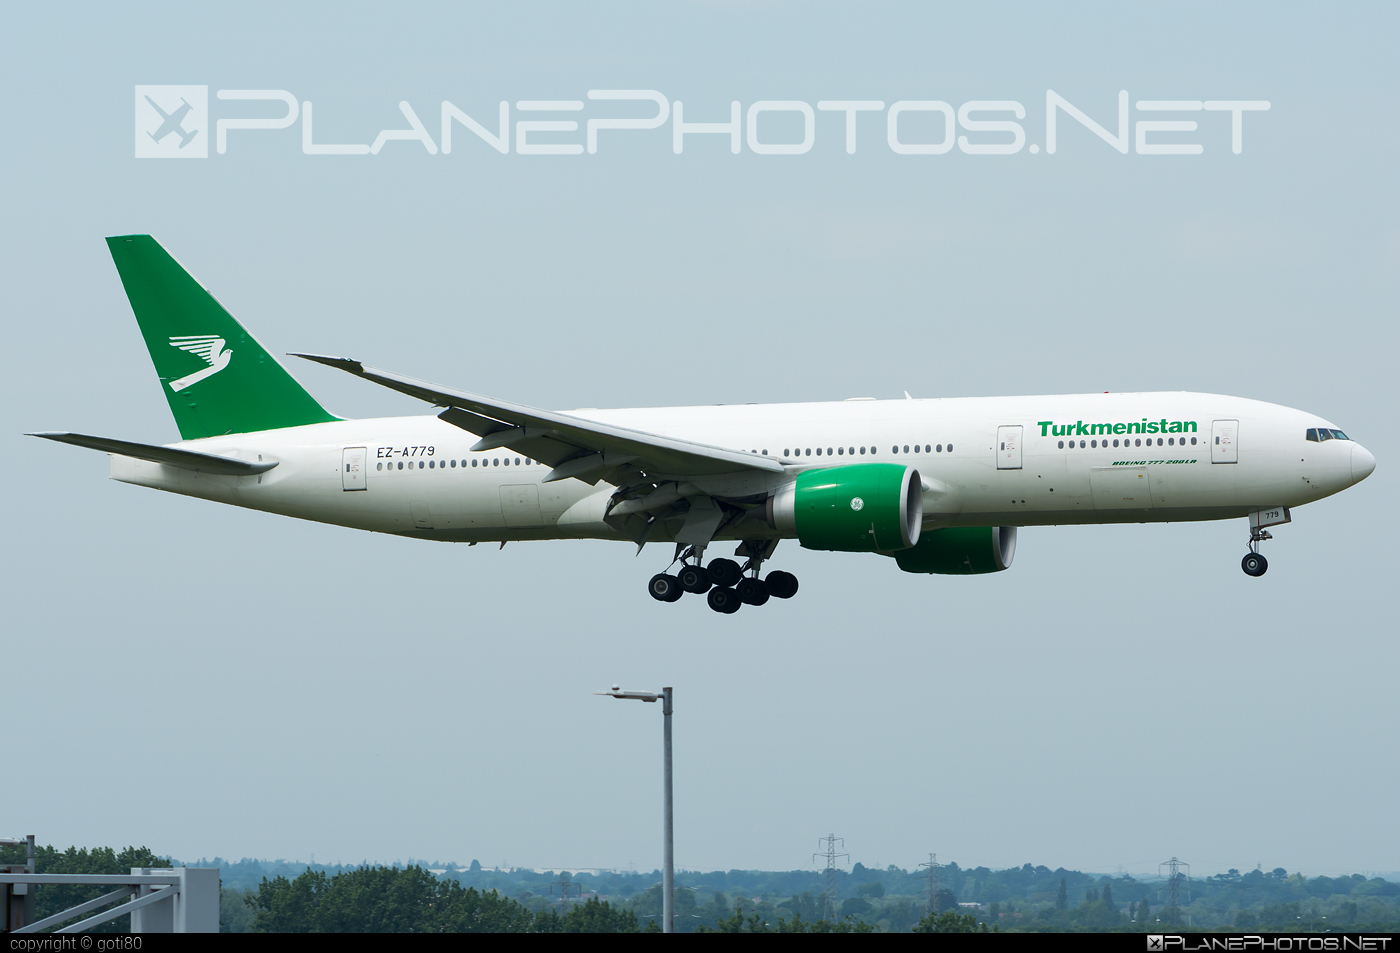 Boeing 777-200LR - EZ-A779 operated by Turkmenistan Airlines #b777 #b777lr #boeing #boeing777 #tripleseven